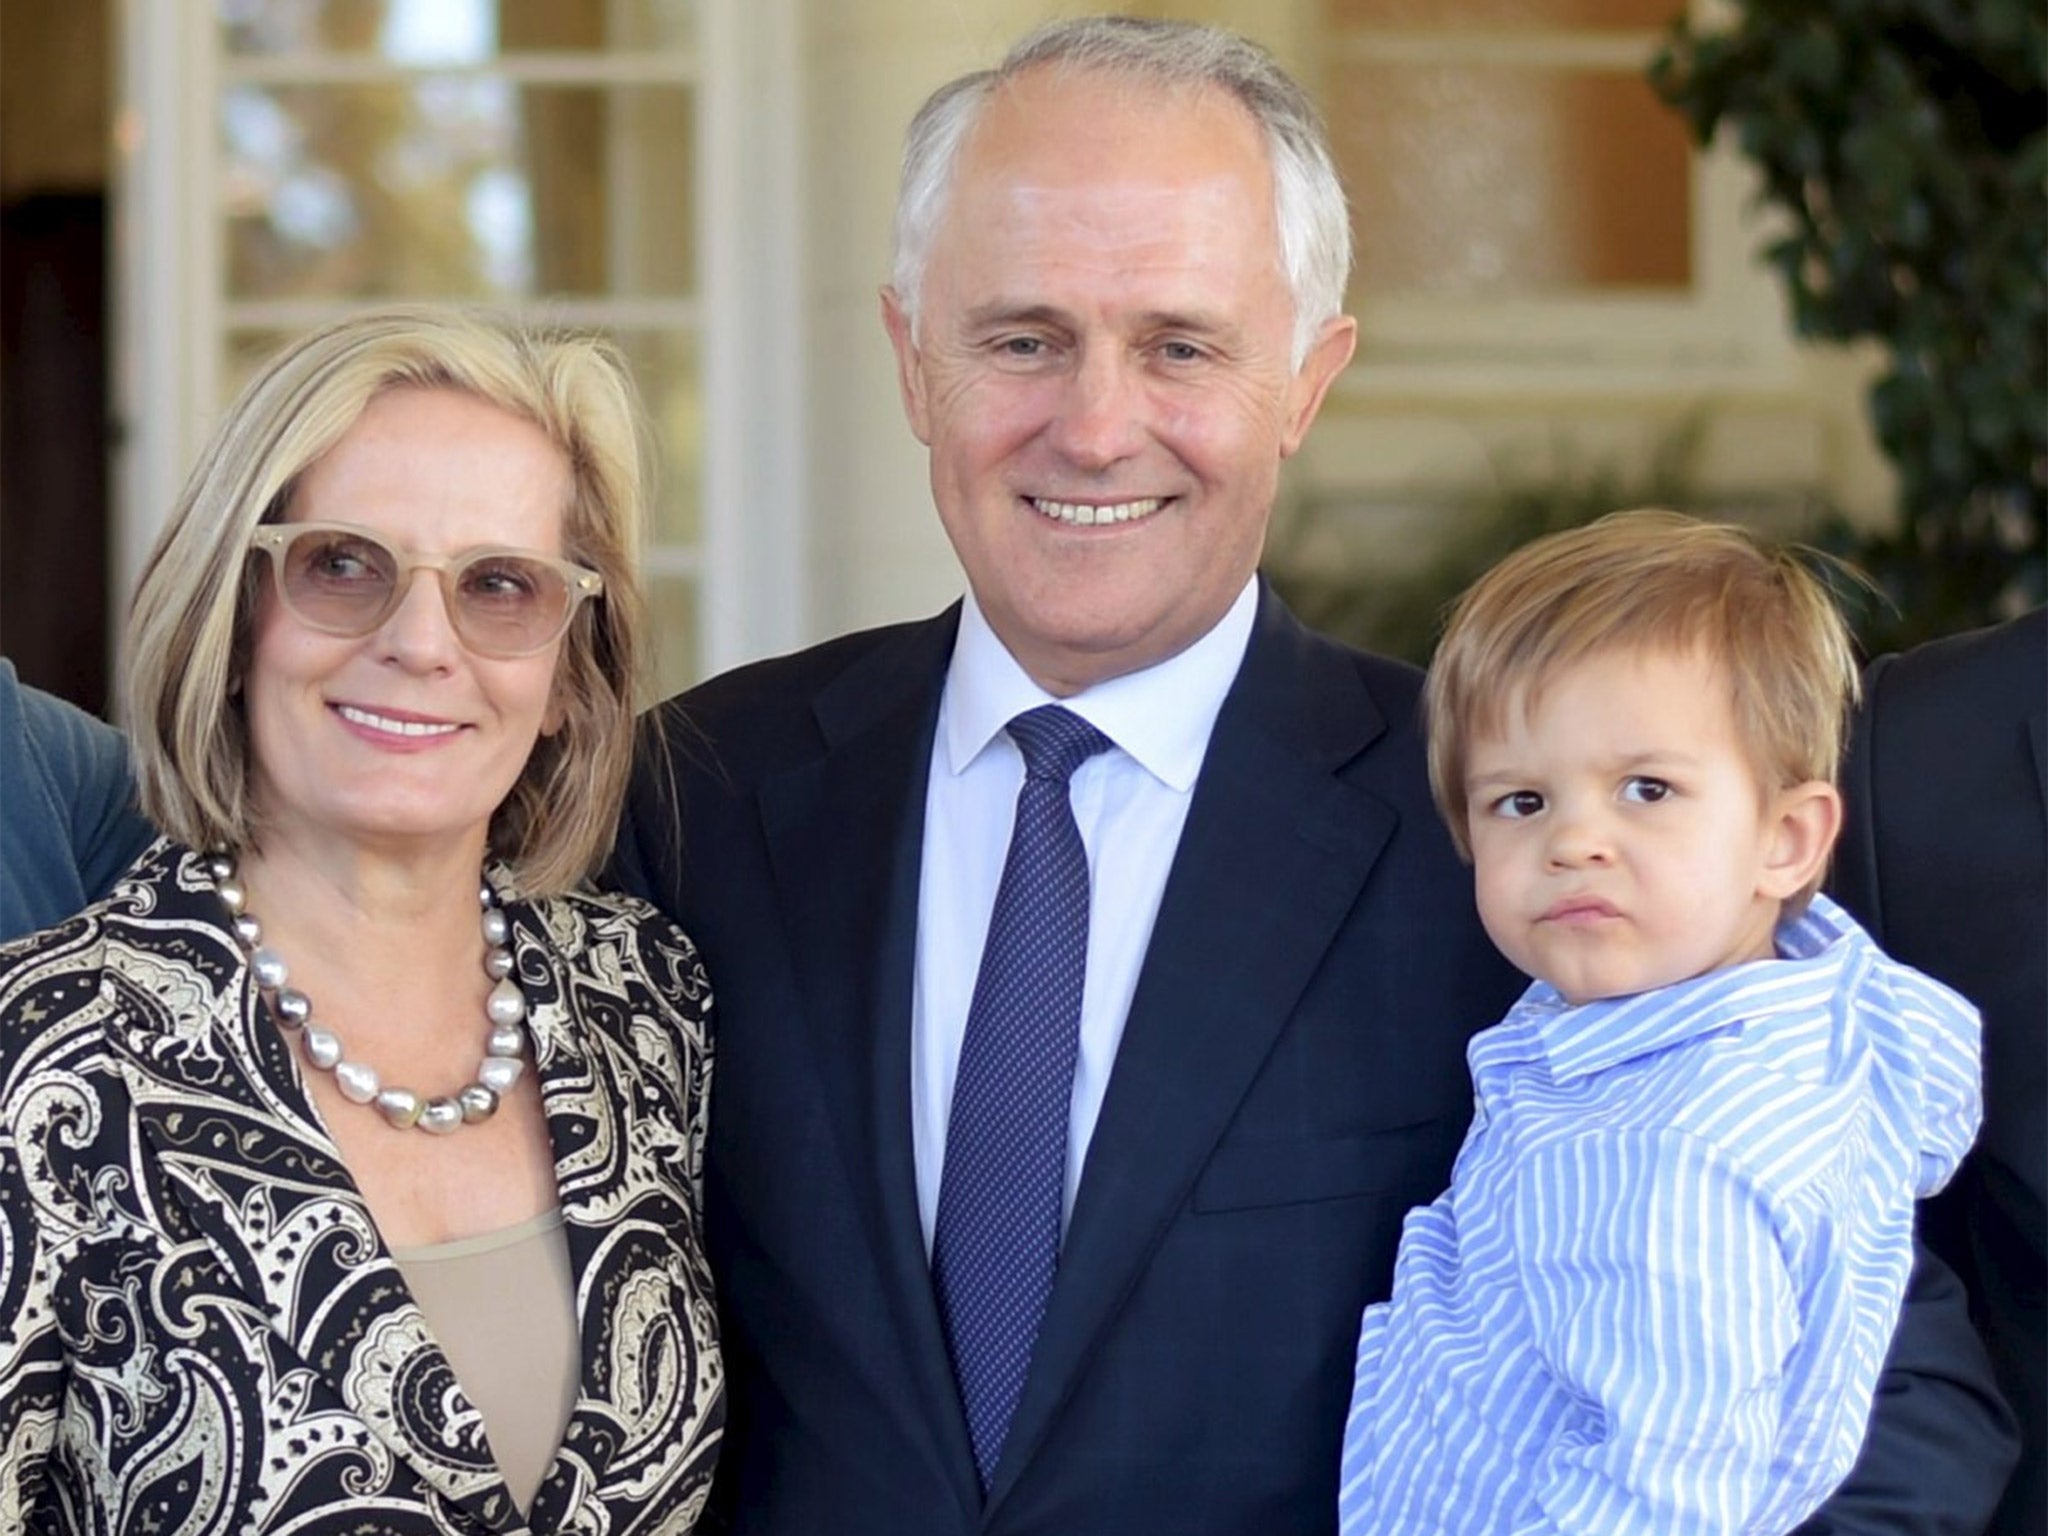 Malcolm Turnbull with his wife Lucy and grandson Jack, outside Government House in Canberra